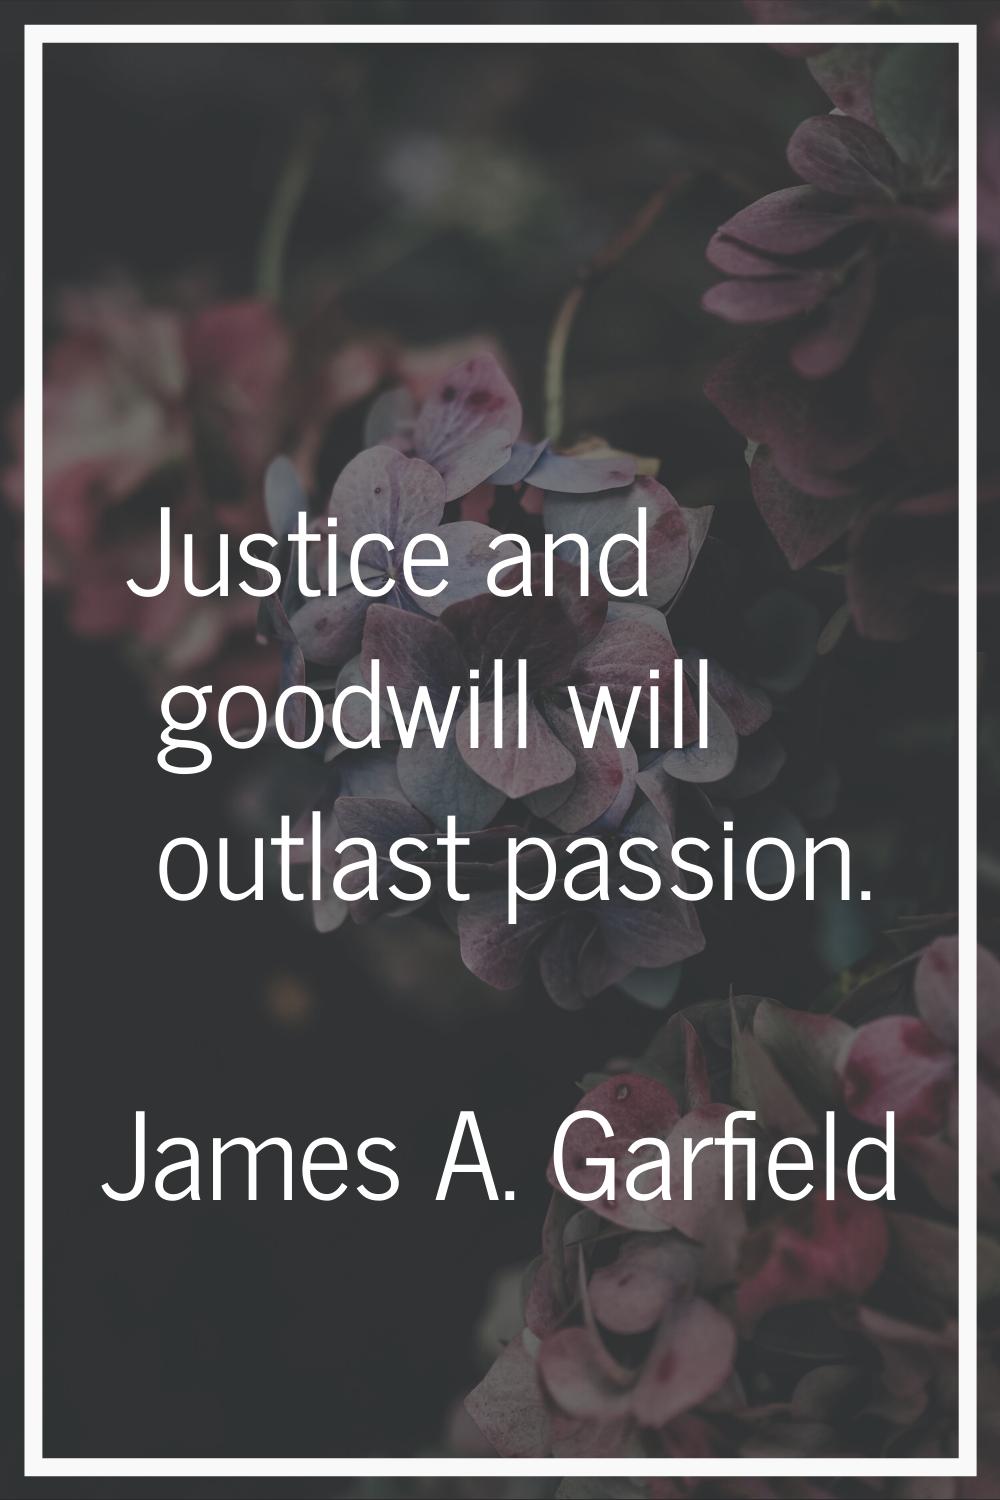 Justice and goodwill will outlast passion.